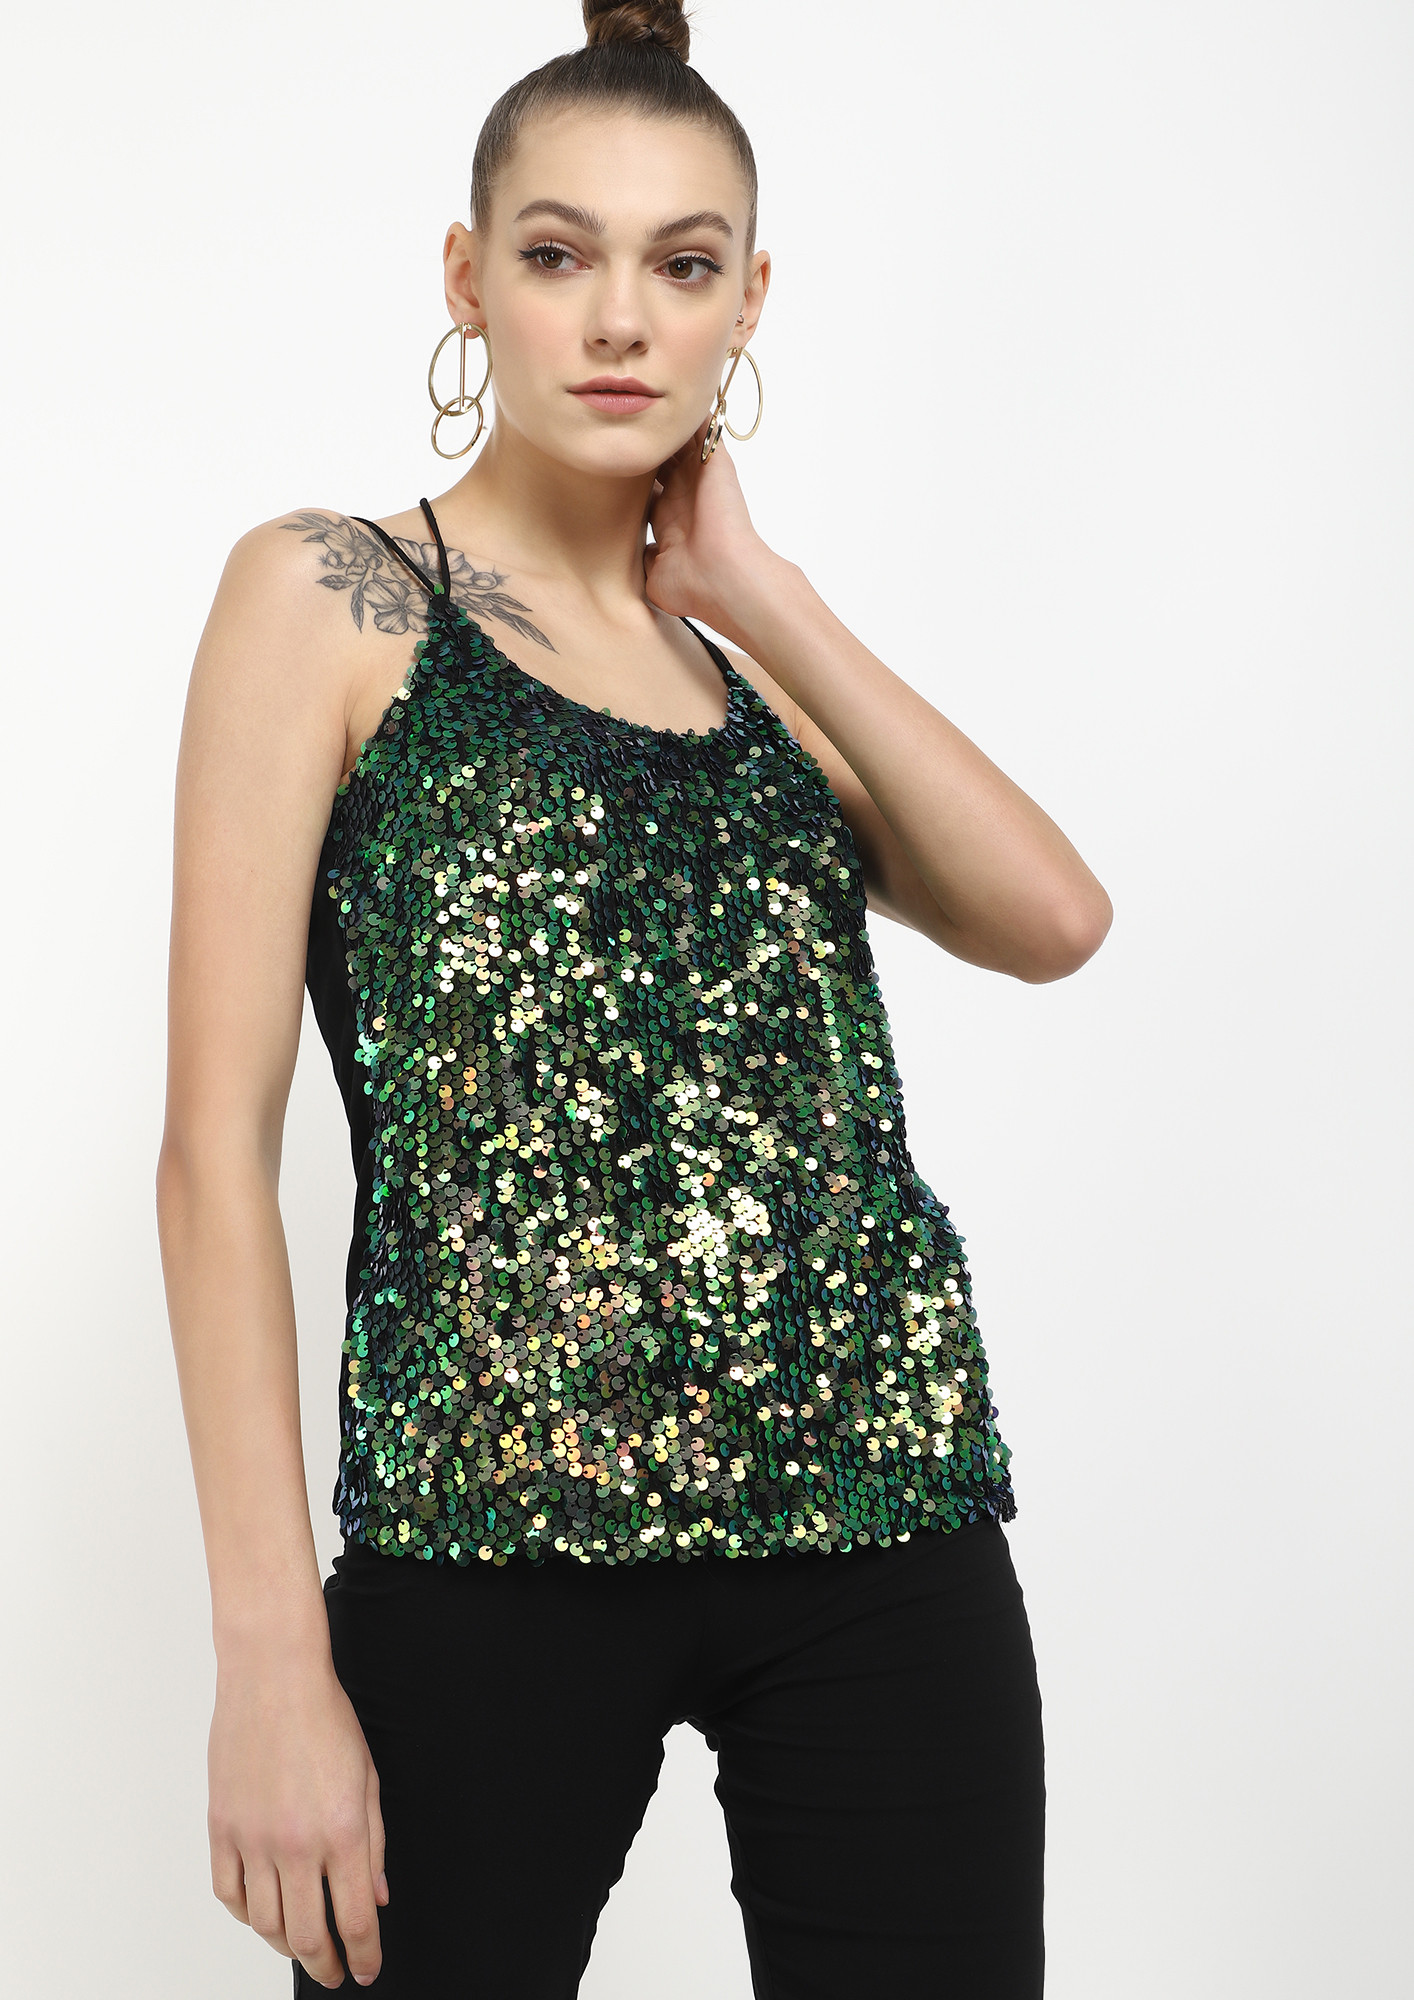 WHATS NOT NOT TO LOVE GREEN CAMI TOP